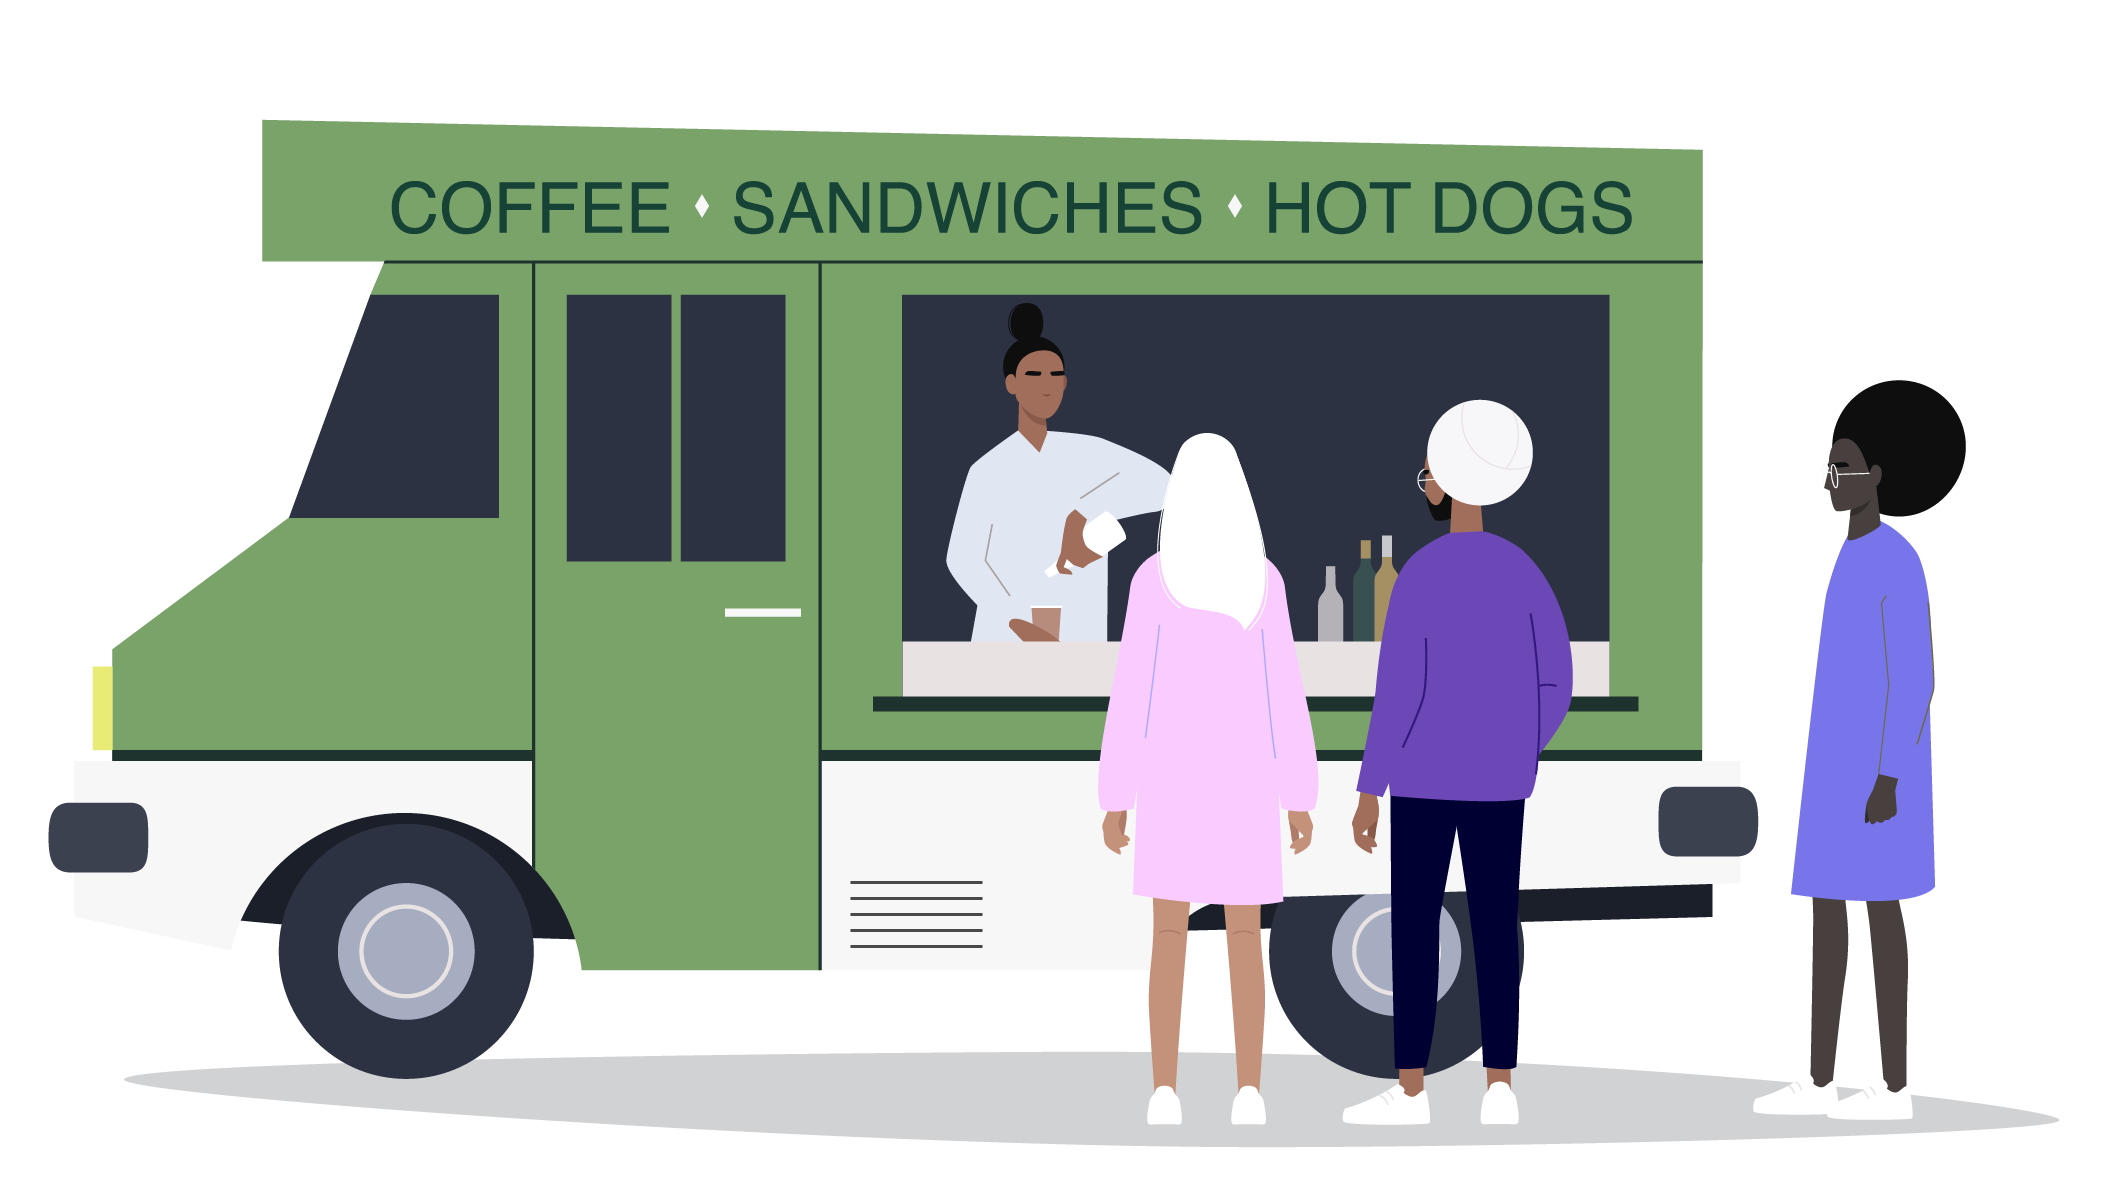 Get help with your food truck business